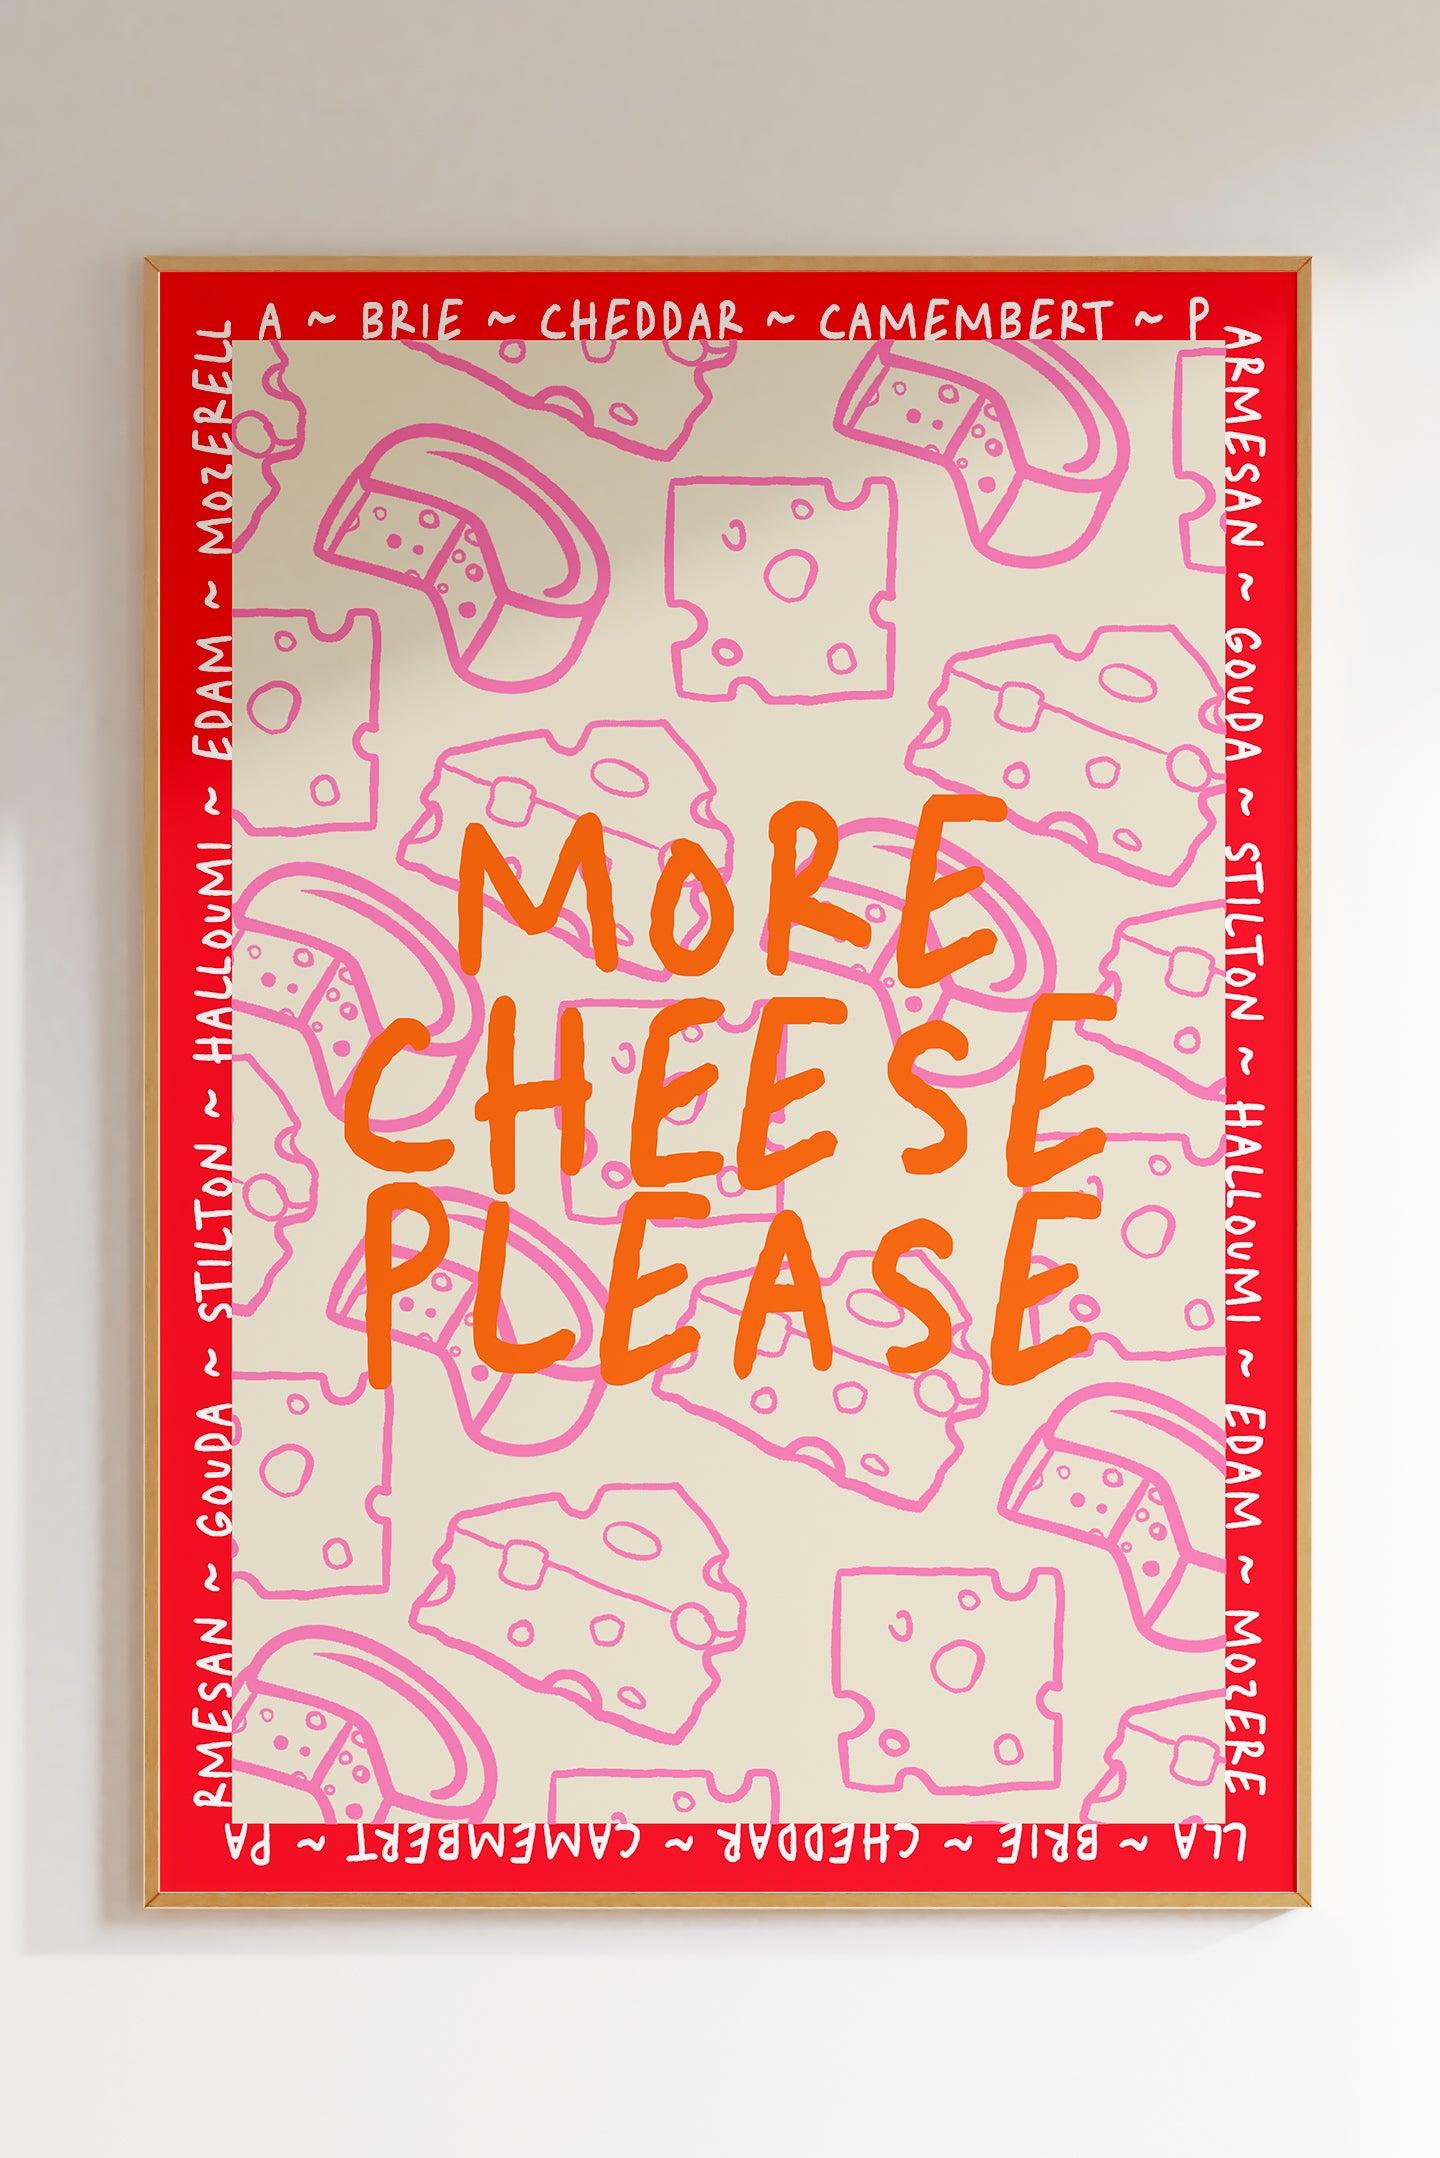 More Cheese Please (More Colours)